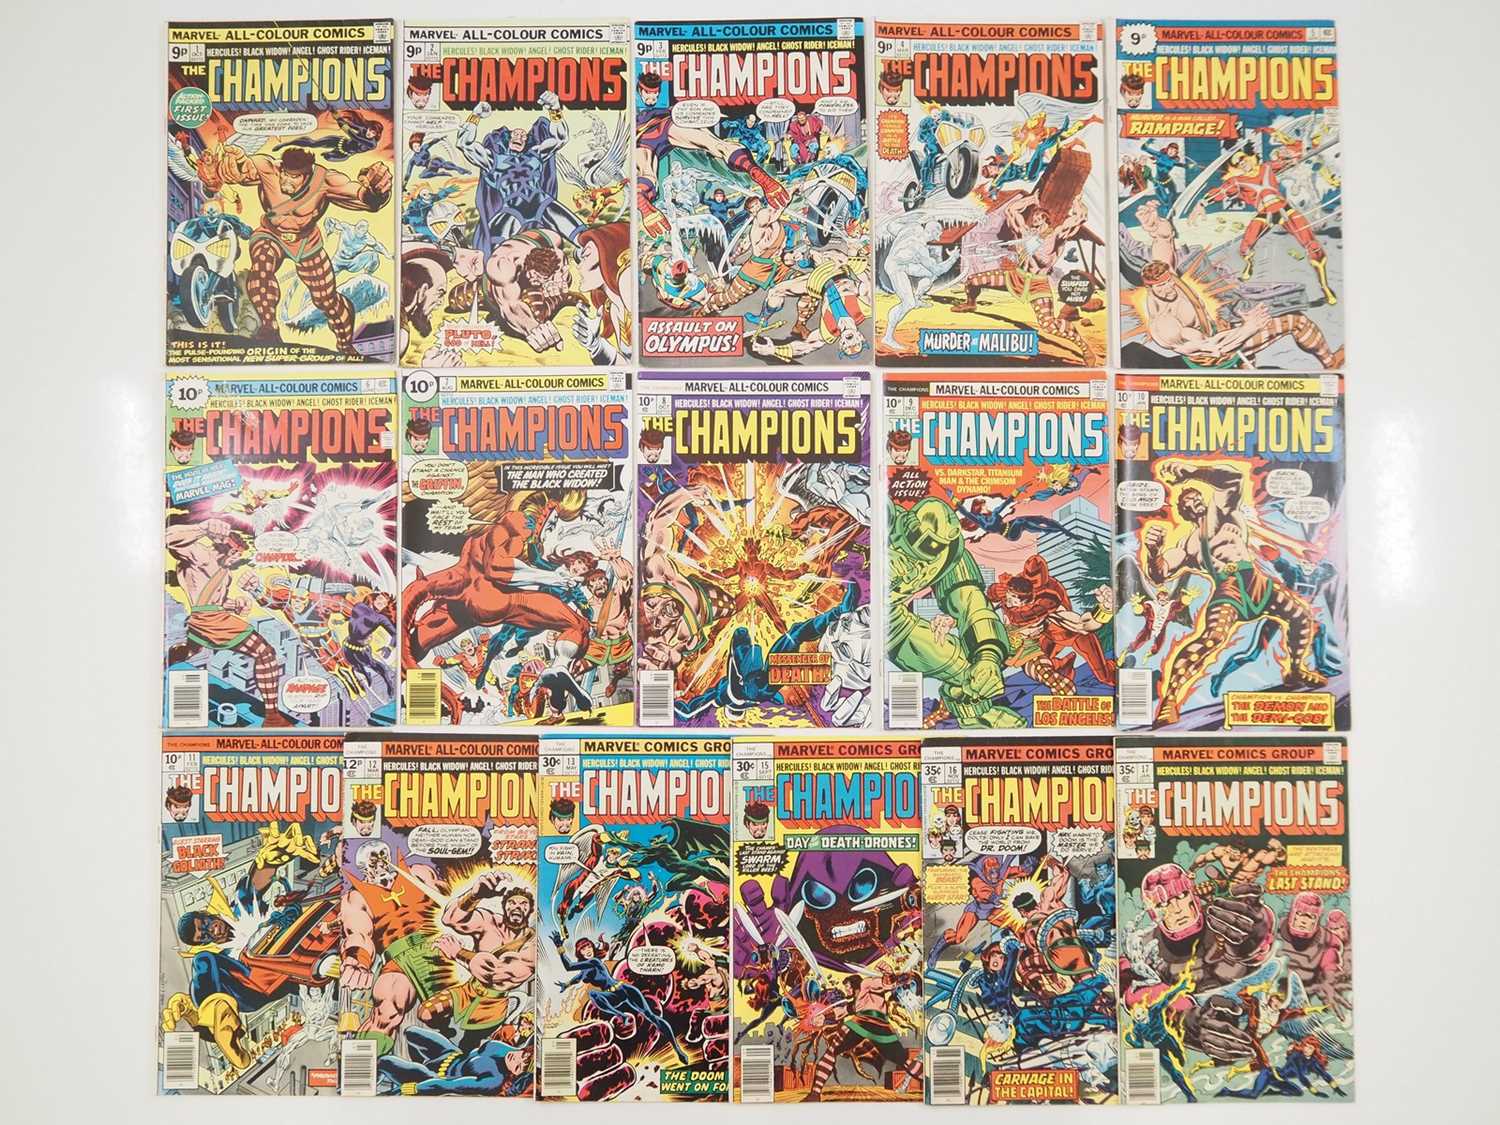 THE CHAMPIONS #1, 2, 3, 4, 5, 6, 7, 8, 9, 10, 11, 12, 13, 15, 16, 17 (16 in Lot) - (1975/1978 -